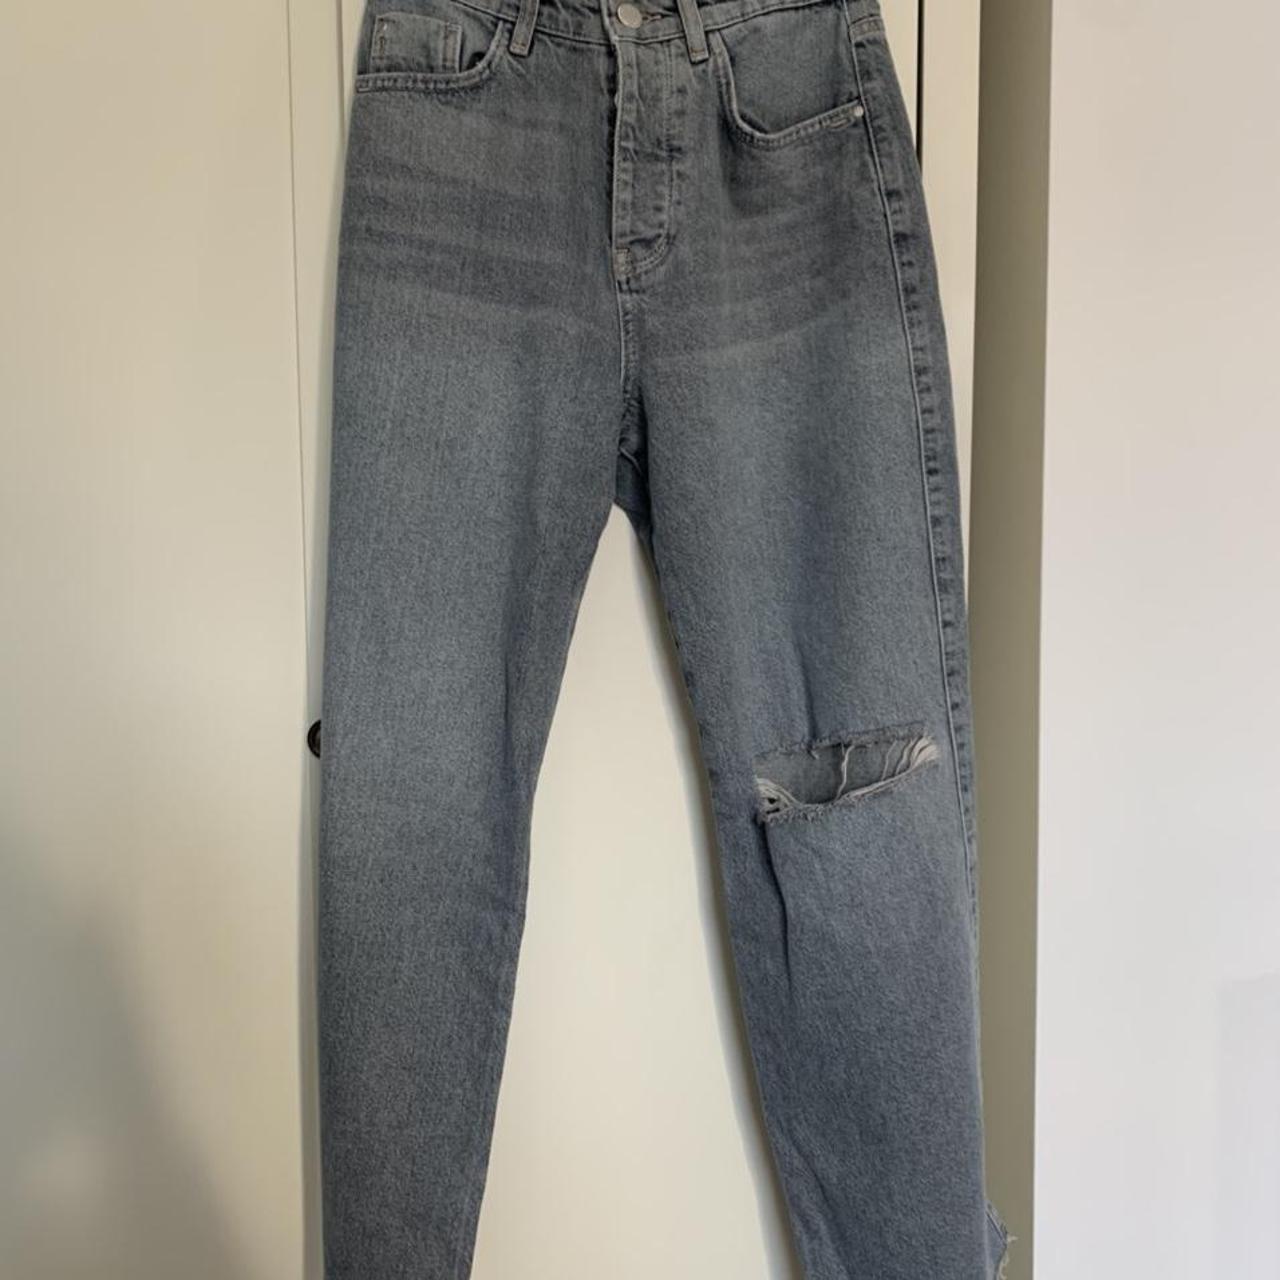 Product Image 4 - Brand new Zara jeans the